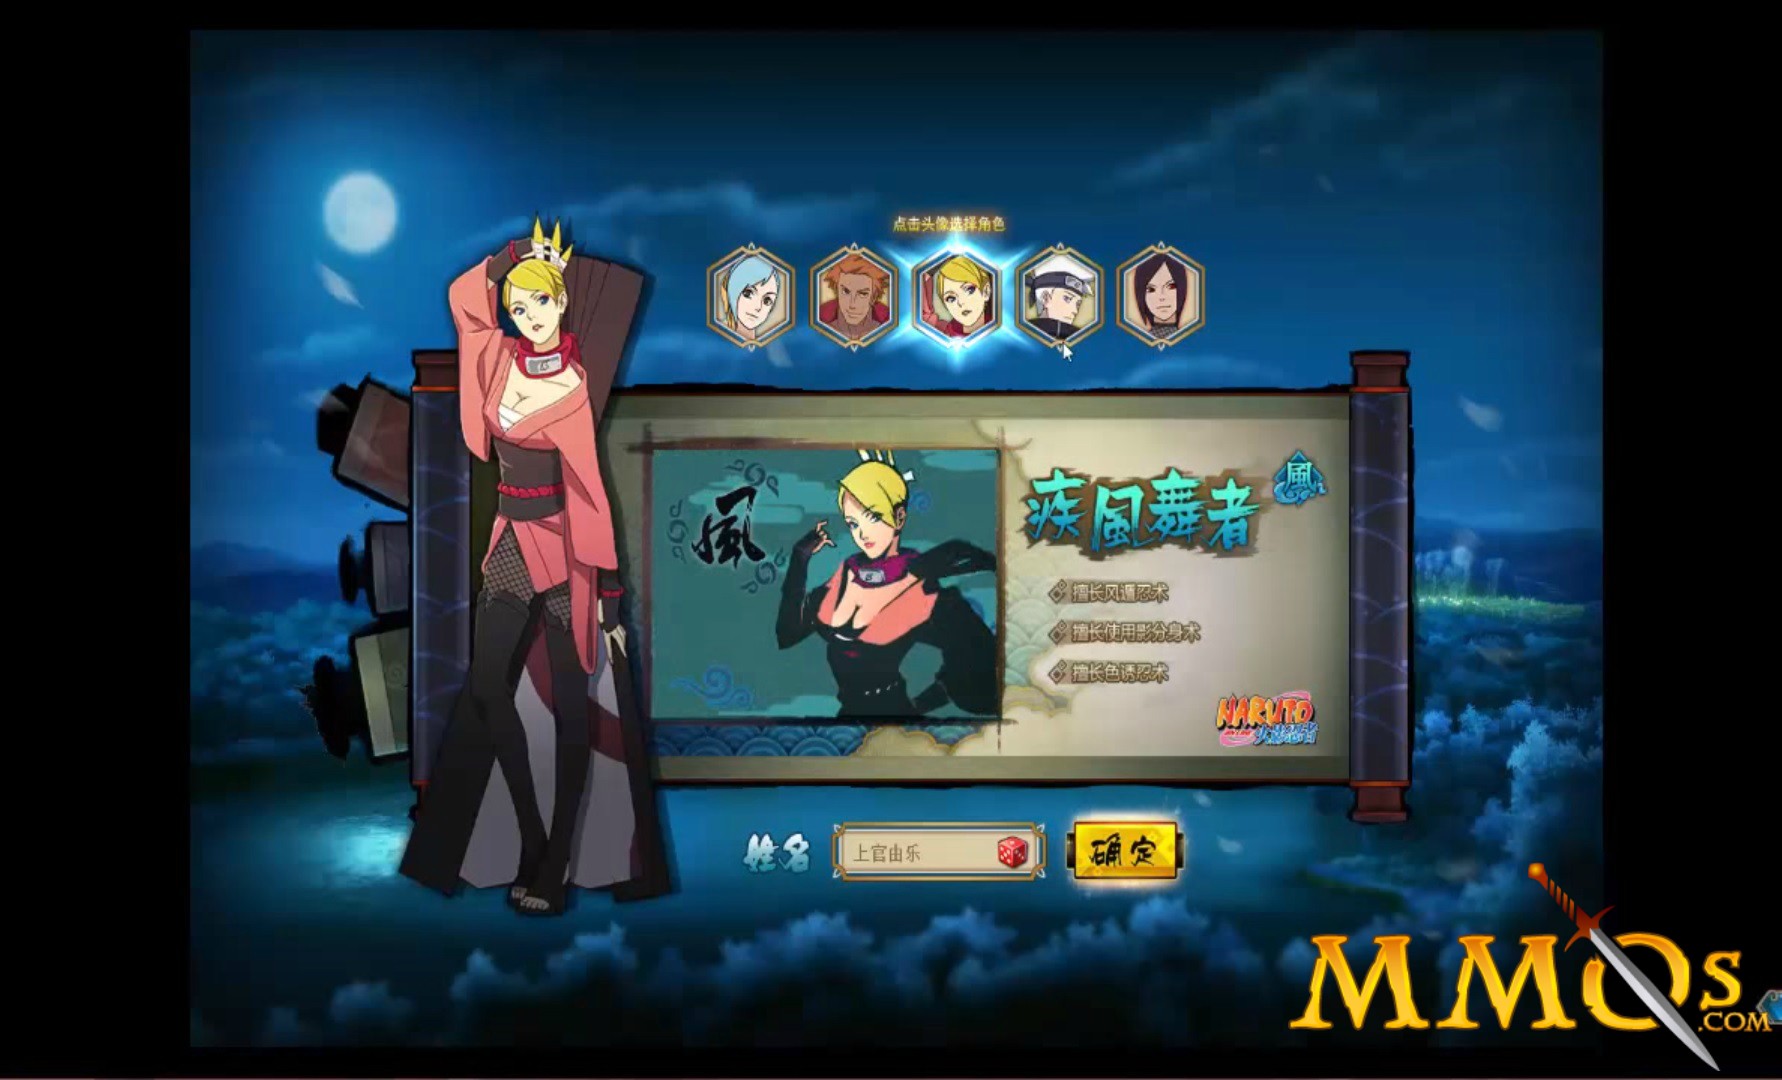 Naruto Spirit is a Free to play, Role Playing MMO Game based on the popular  anime Naruto